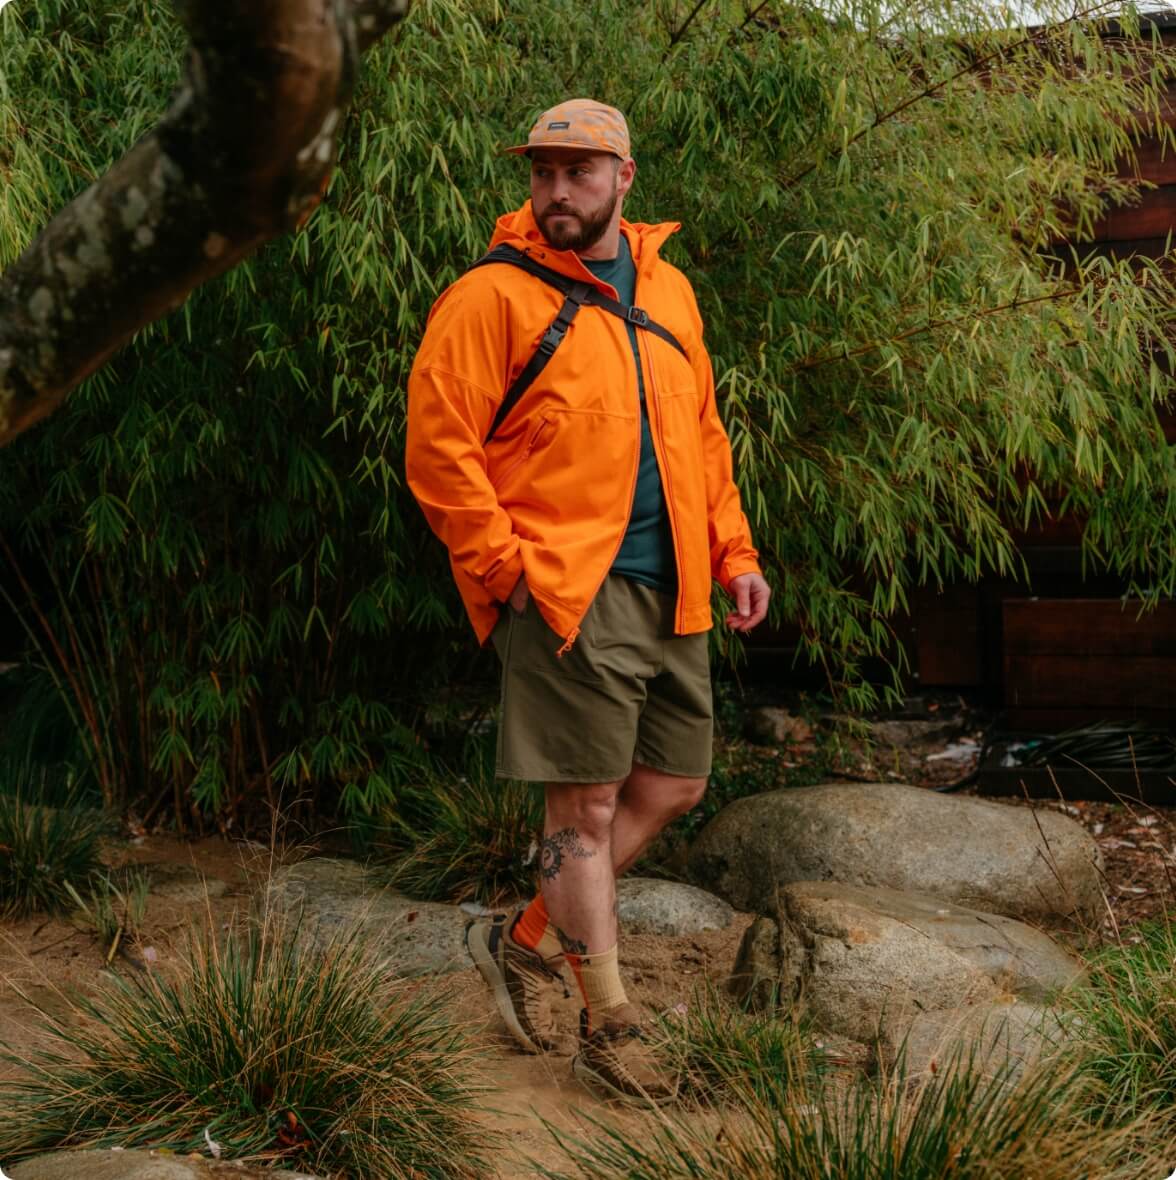 Person wearing orange rain jacket out in nature